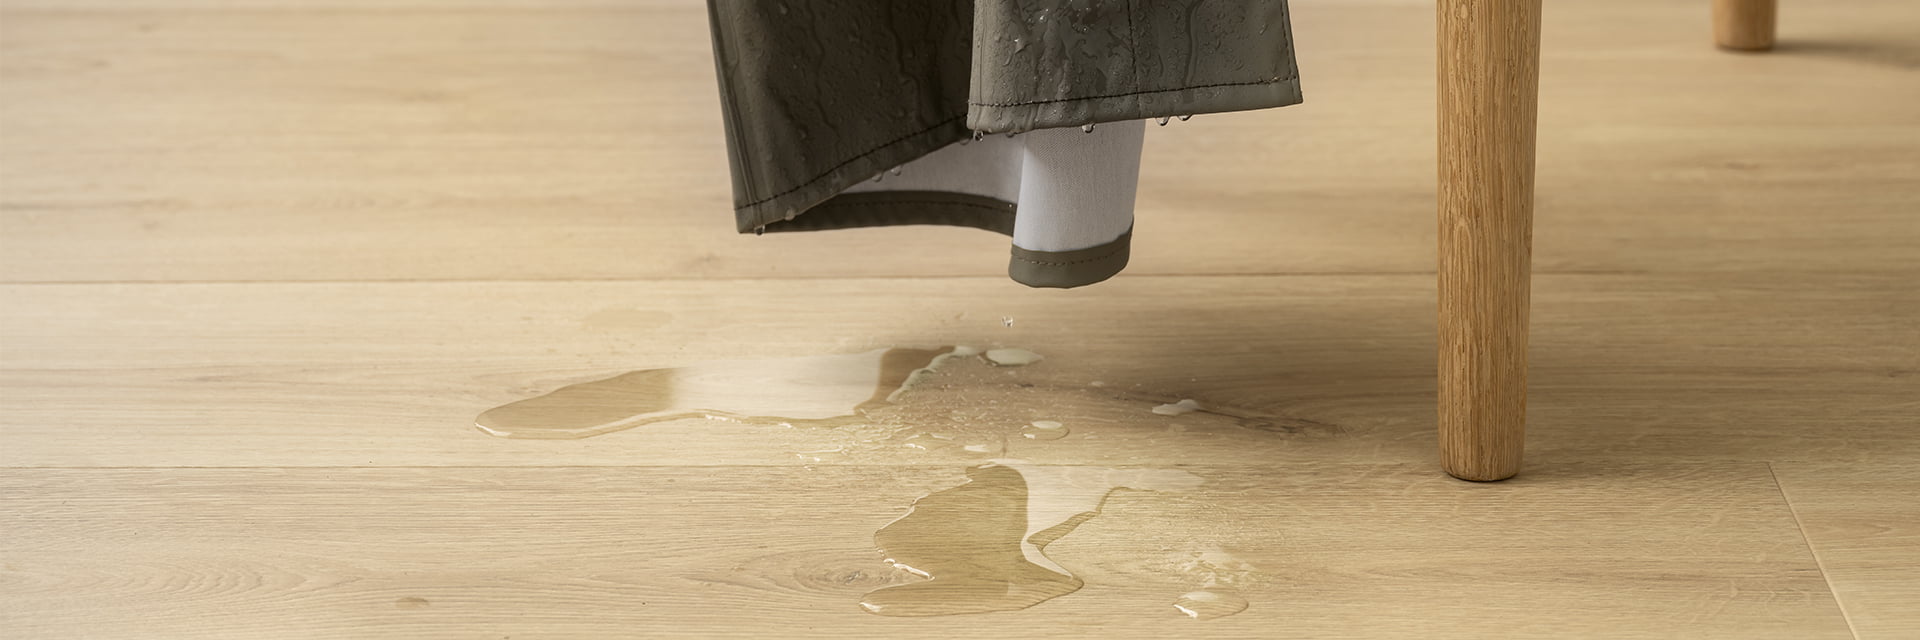 rain coat hanging on chair with water drops falling on a beige laminate floor